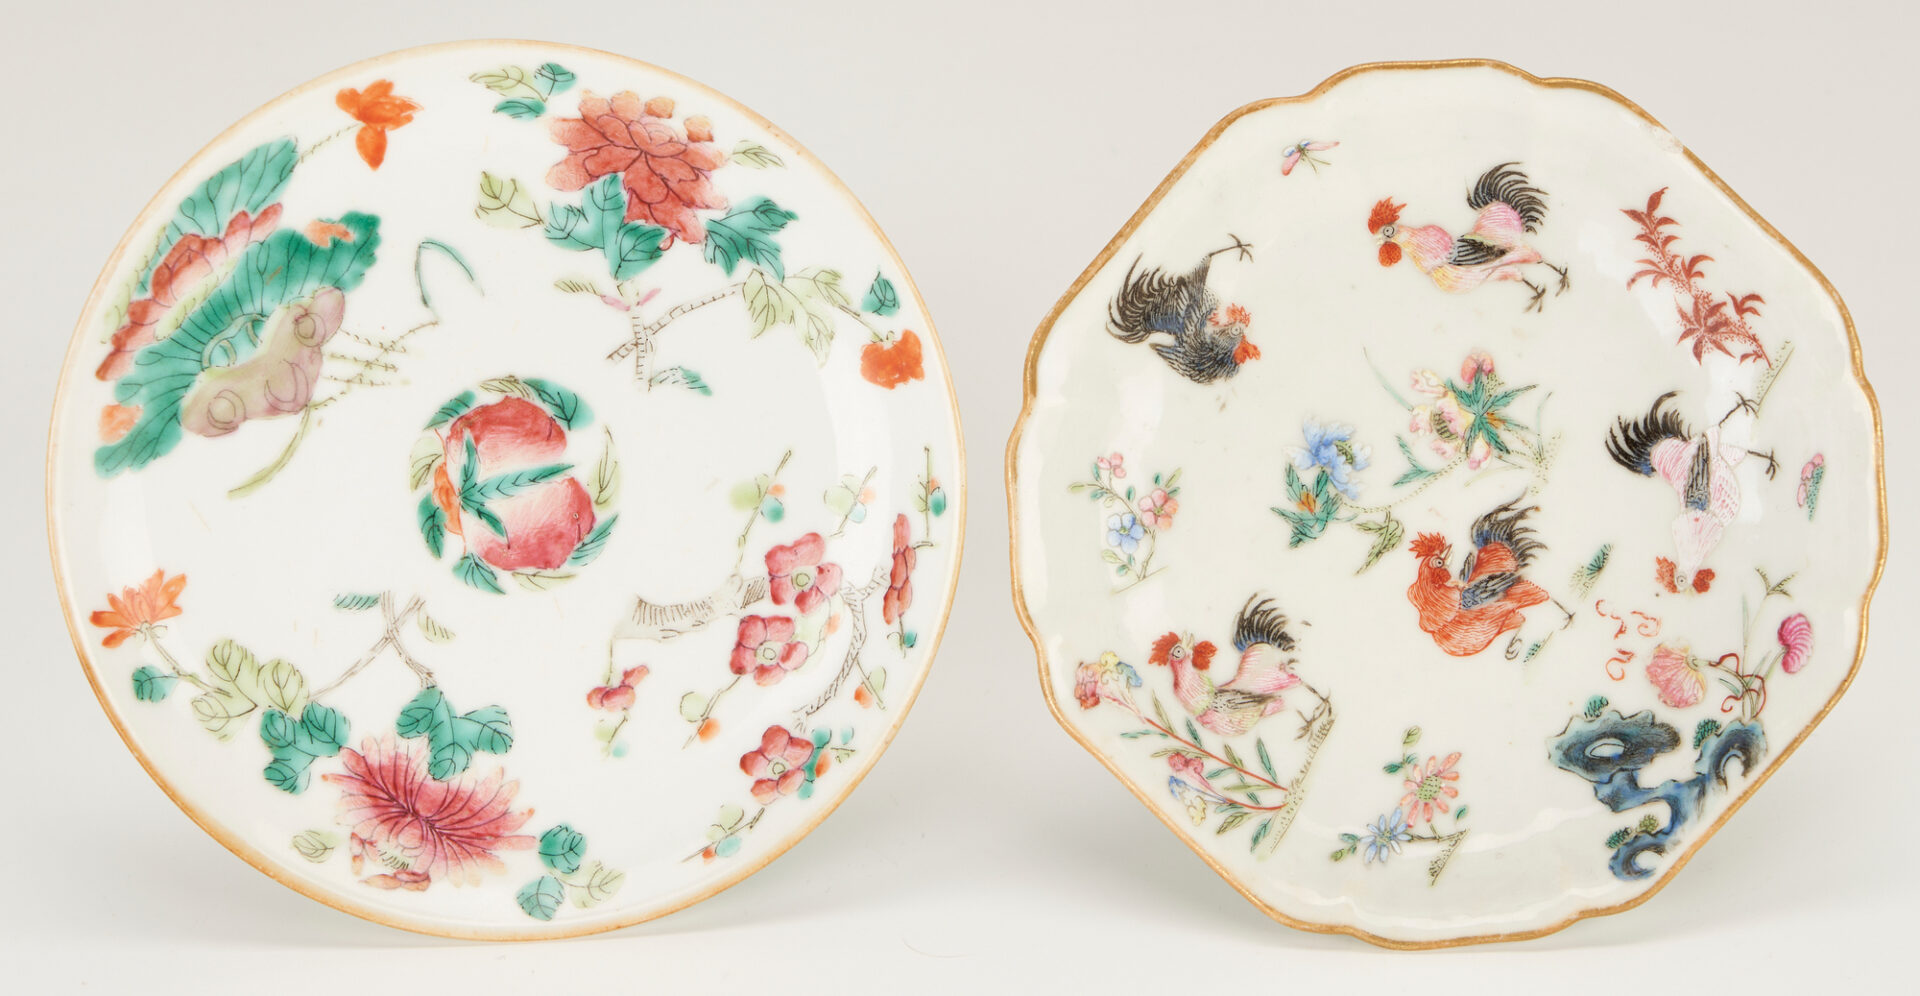 Lot 21: Chinese Export Tobacco Leaf Plate & 2 Tazzas, Rooster design